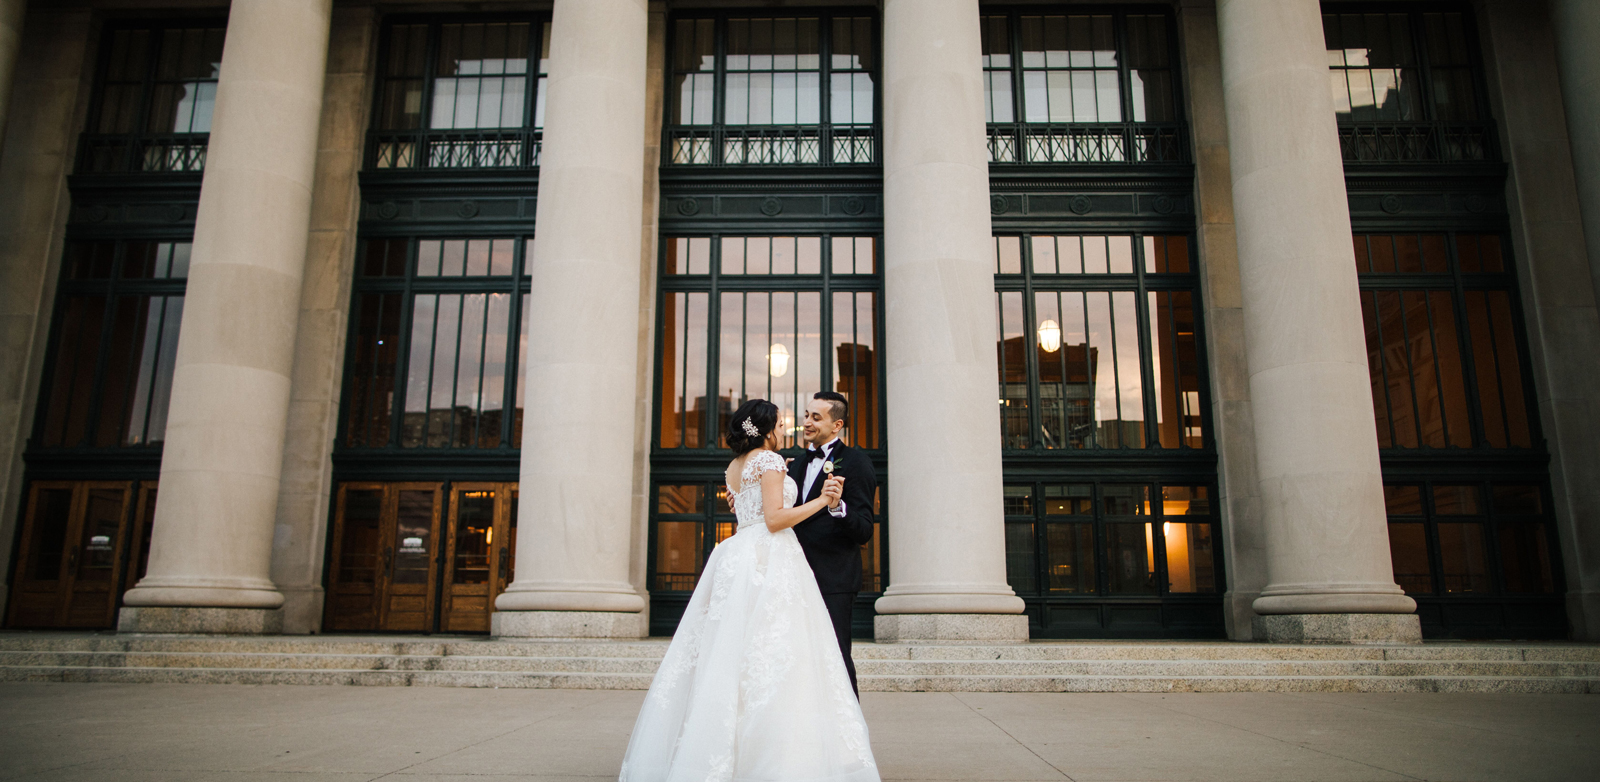 Wedding in front of Union Depot